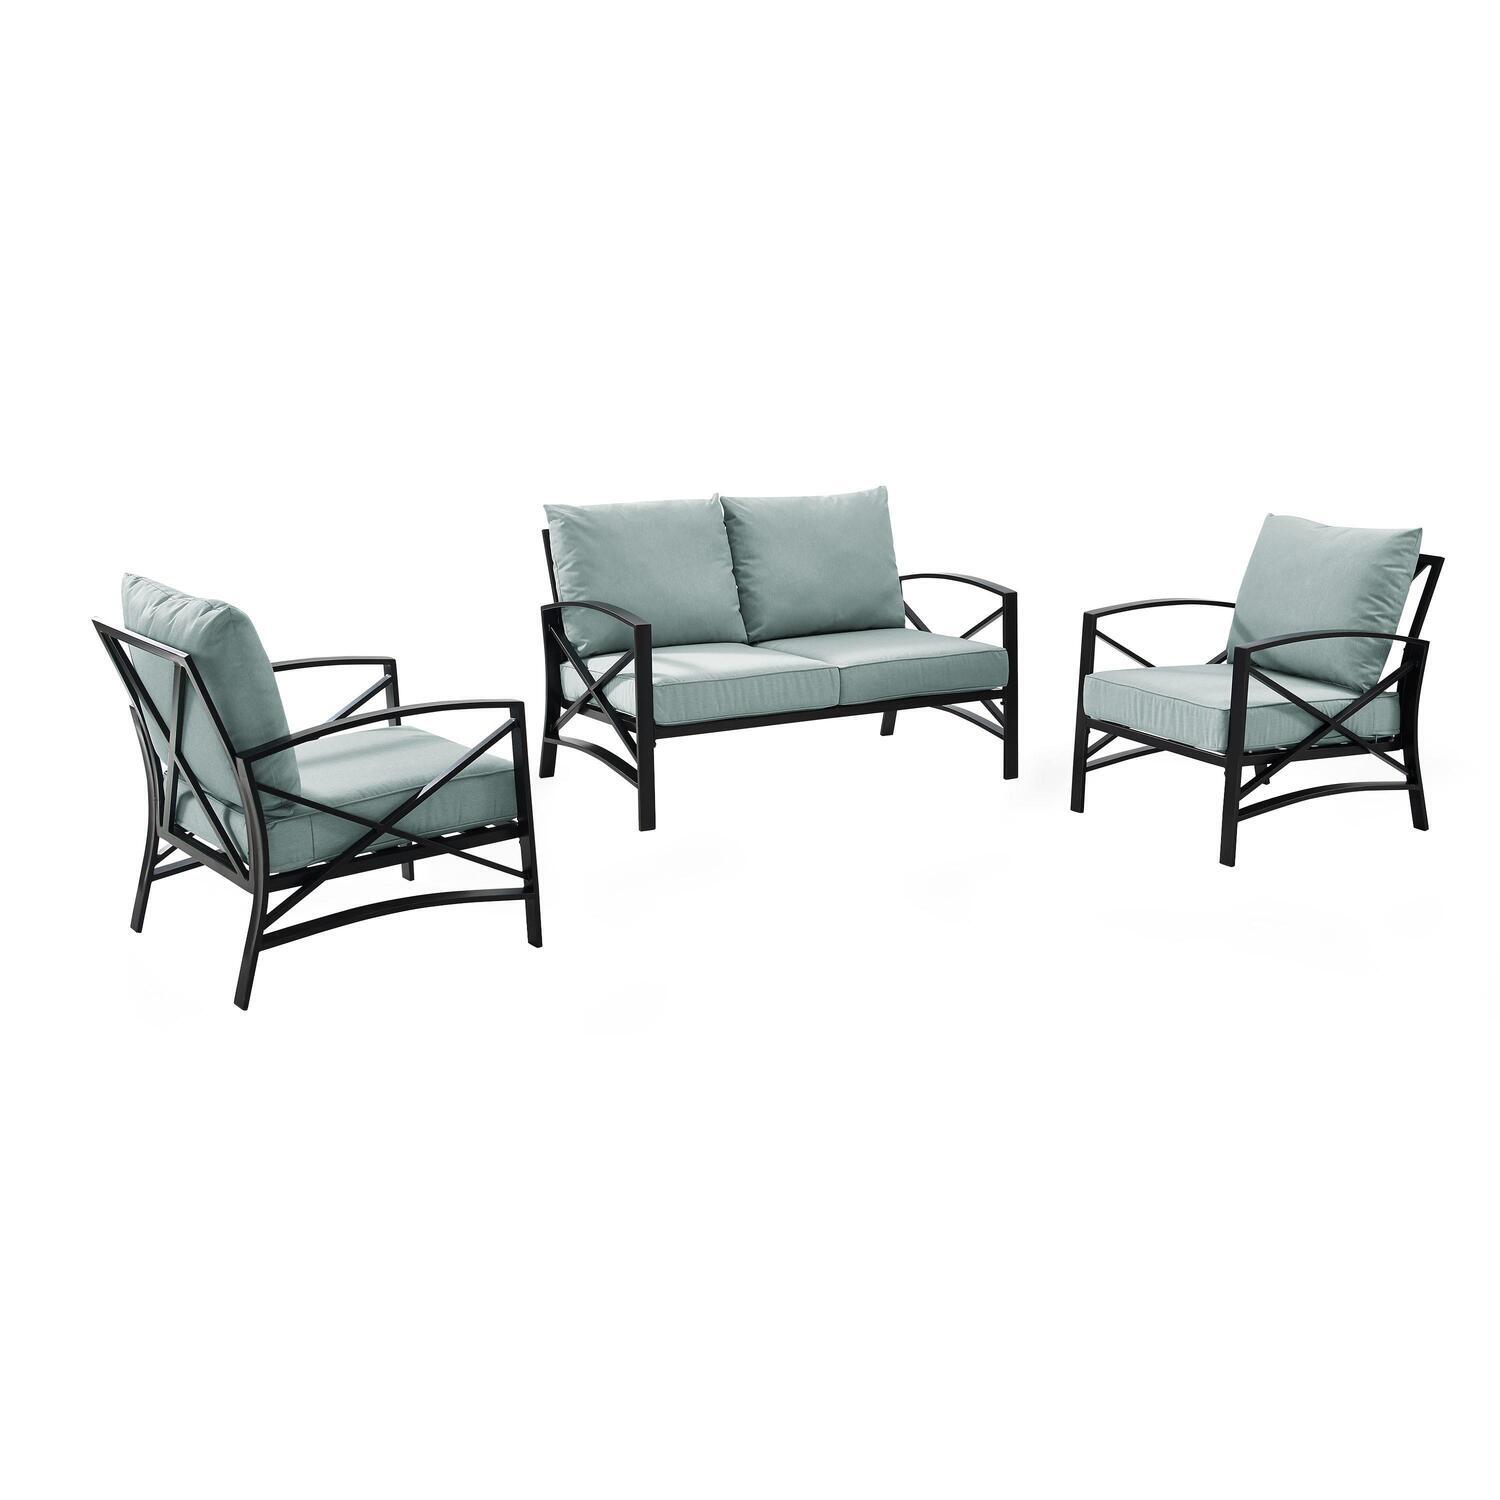 Crosley Furniture Kaplan 3 Pc Outdoor Seating Set With Mist Cushion - Loveseat, Two Outdoor Chairs - image 1 of 8